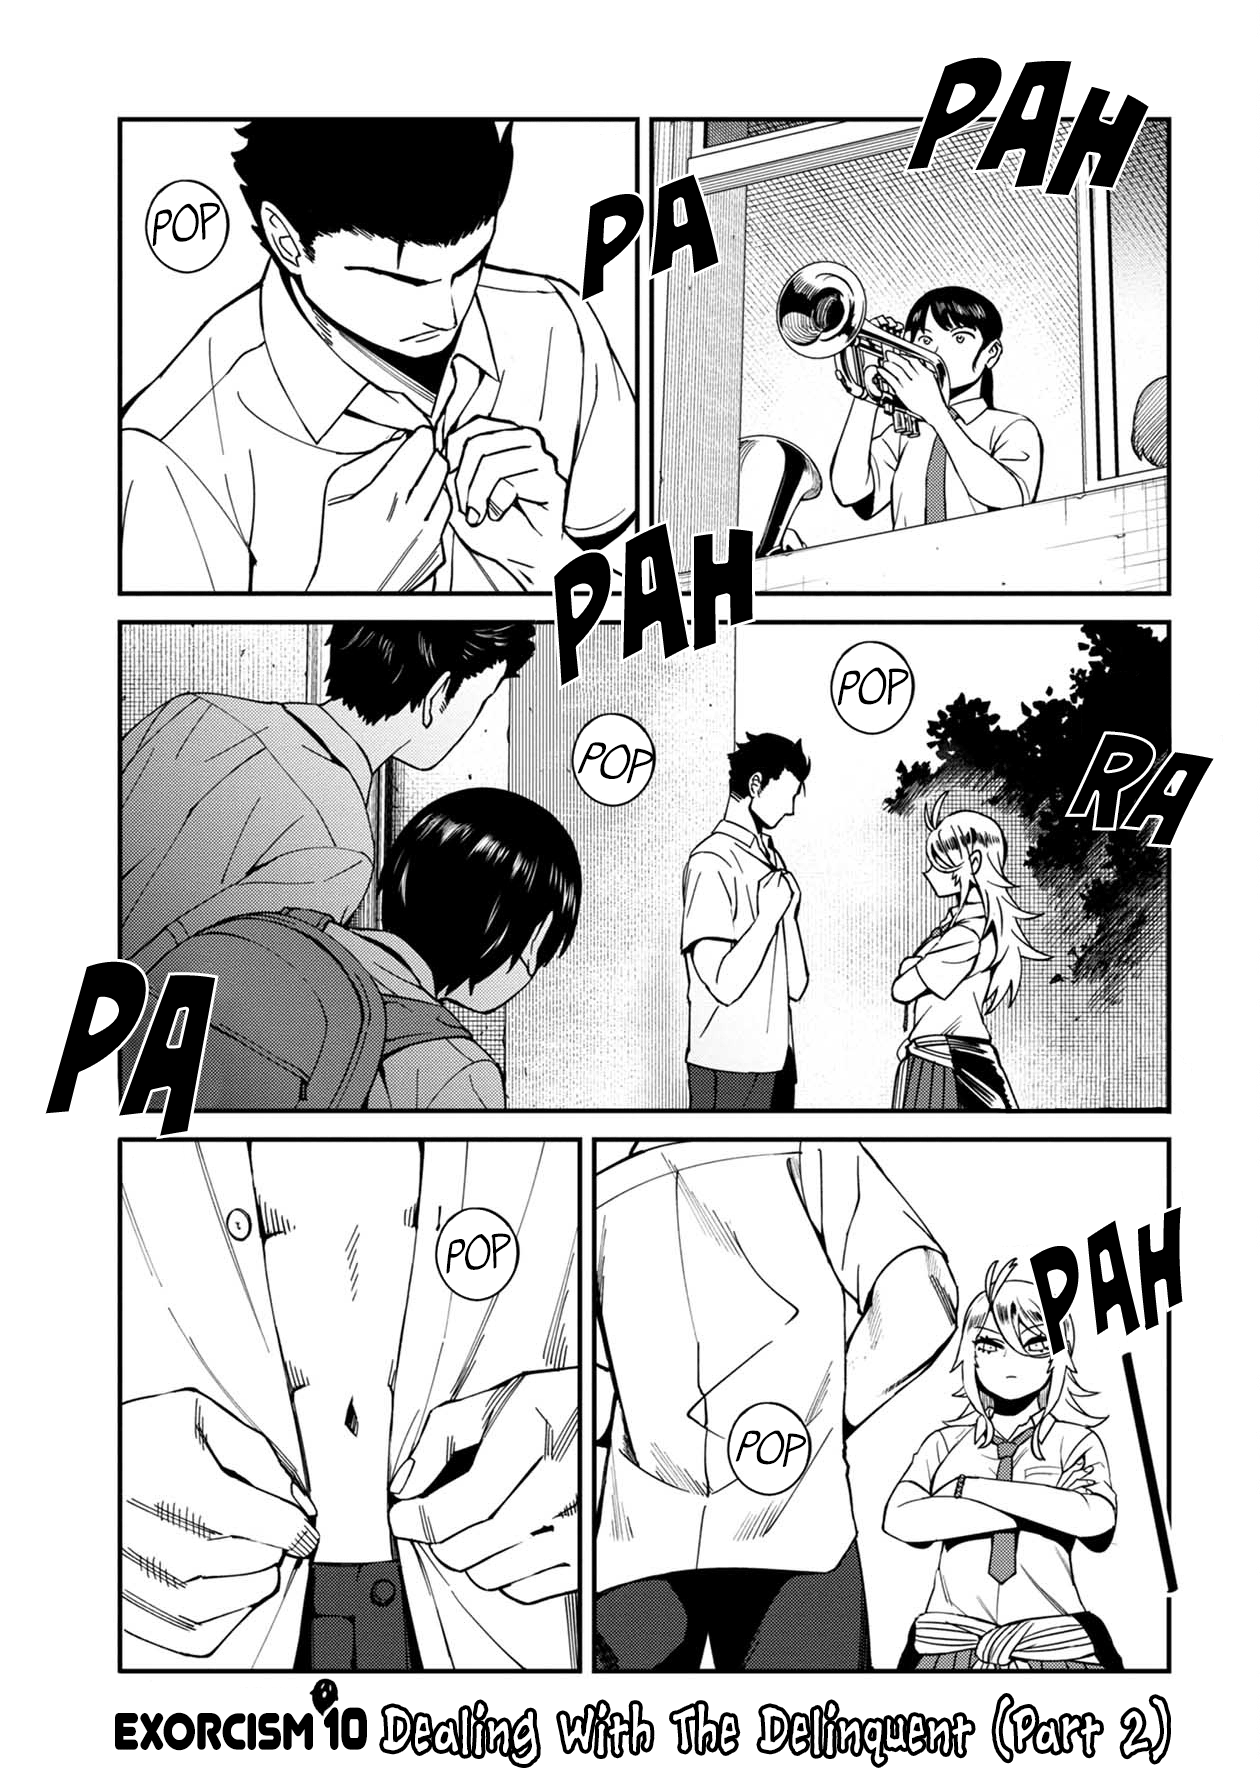 Bad Girl-Exorcist Reina Vol.1 Chapter 10: Exorcism #10 - Dealing With The Delinquent (Part 2) - Picture 1